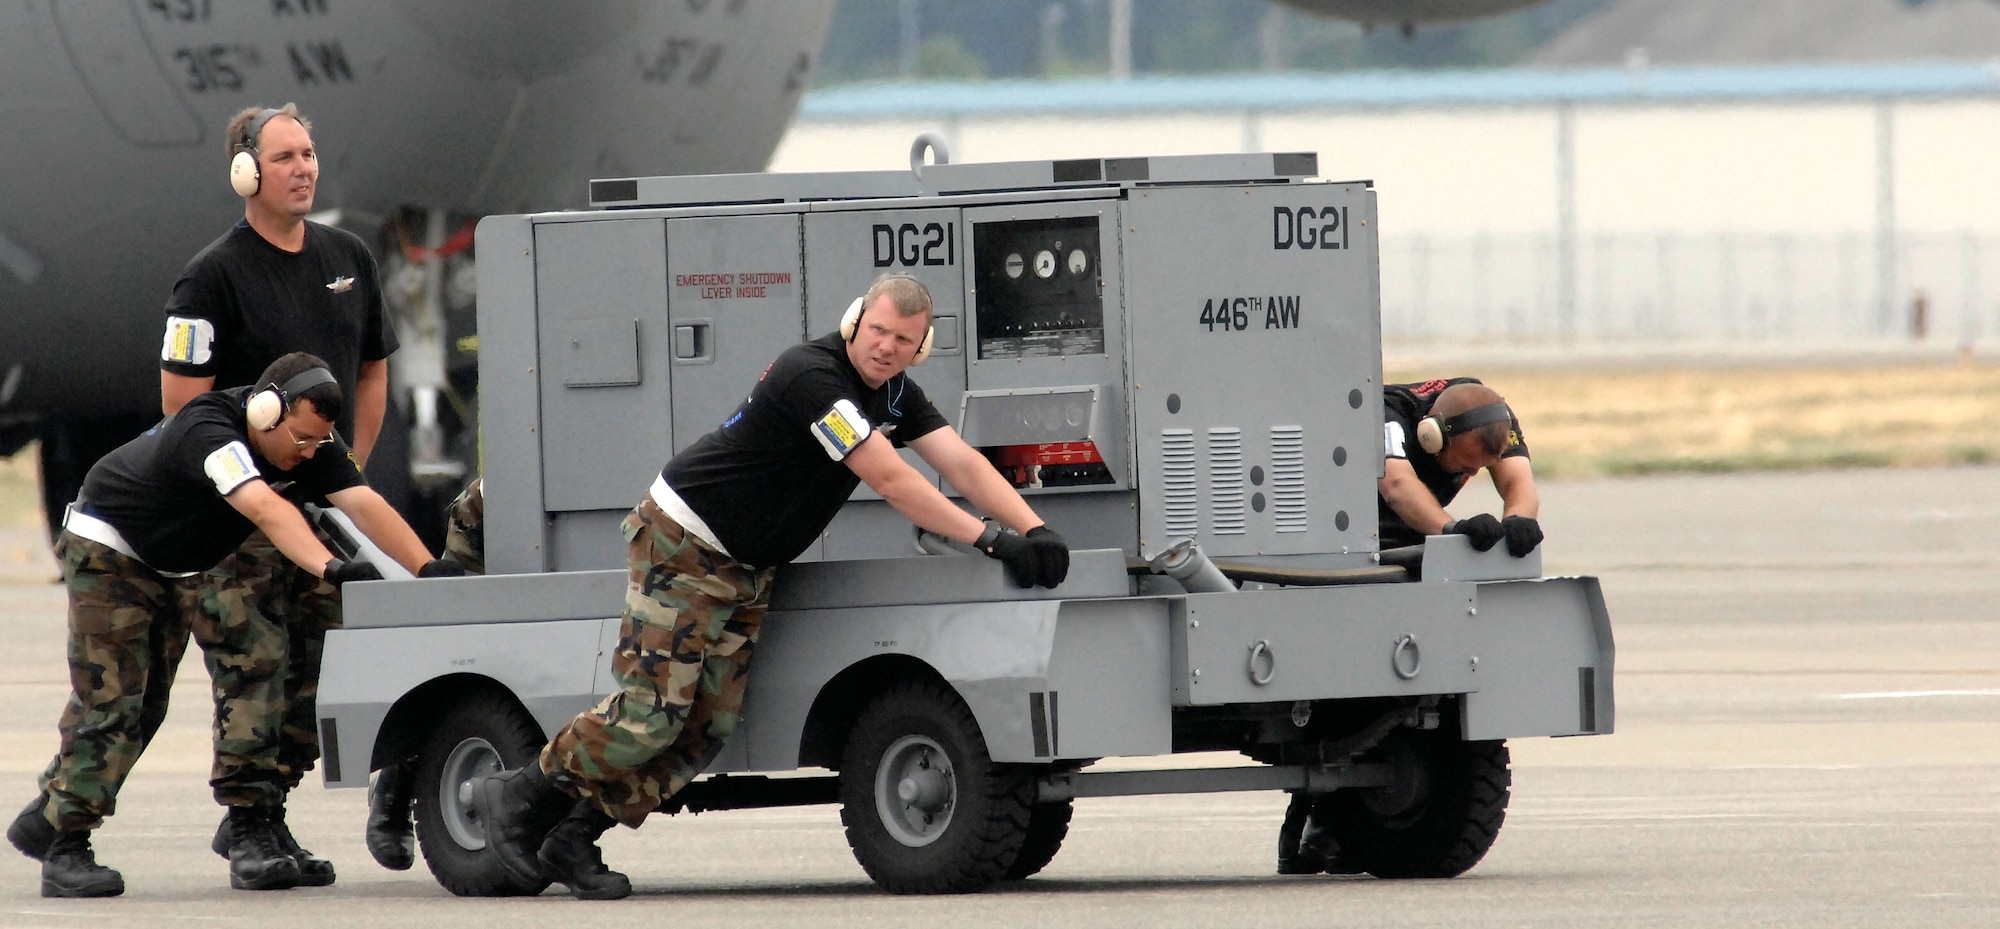 Members of the 446th Airlift Wing's Rodeo maintenance team, McChord Air Force Base, Wash.,  push a cart away from the C-17 during Rodeo 2007, held July 23-27 at McChord. (From left to right) Tech. Sgt. Michael Silva, Master Sgt. Michael Stewart, Tech. Sgt. Thomas Teal and Tech. Sgt. Thomas Timney. (U.S. Air Force photo/Abner Guzman)